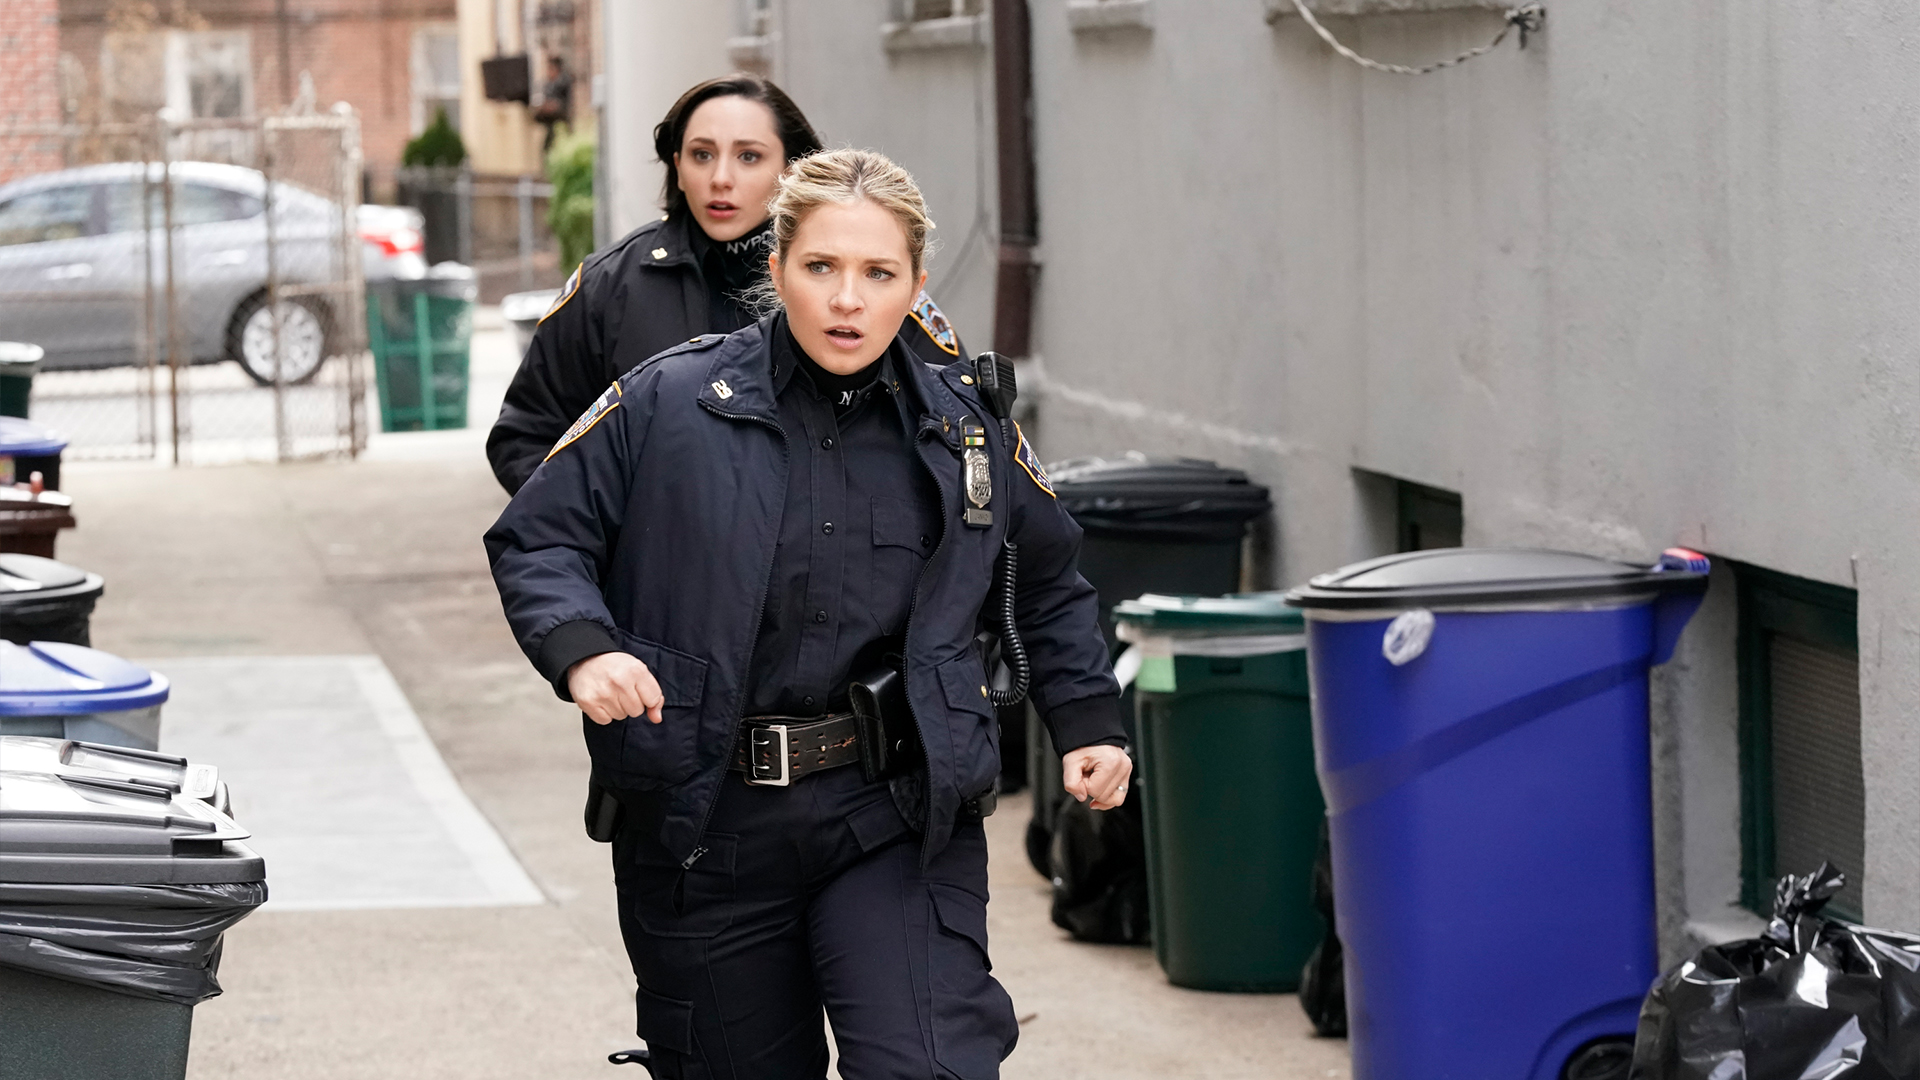 Blue Bloods Season 10 Episode 16 - The First 100 Days